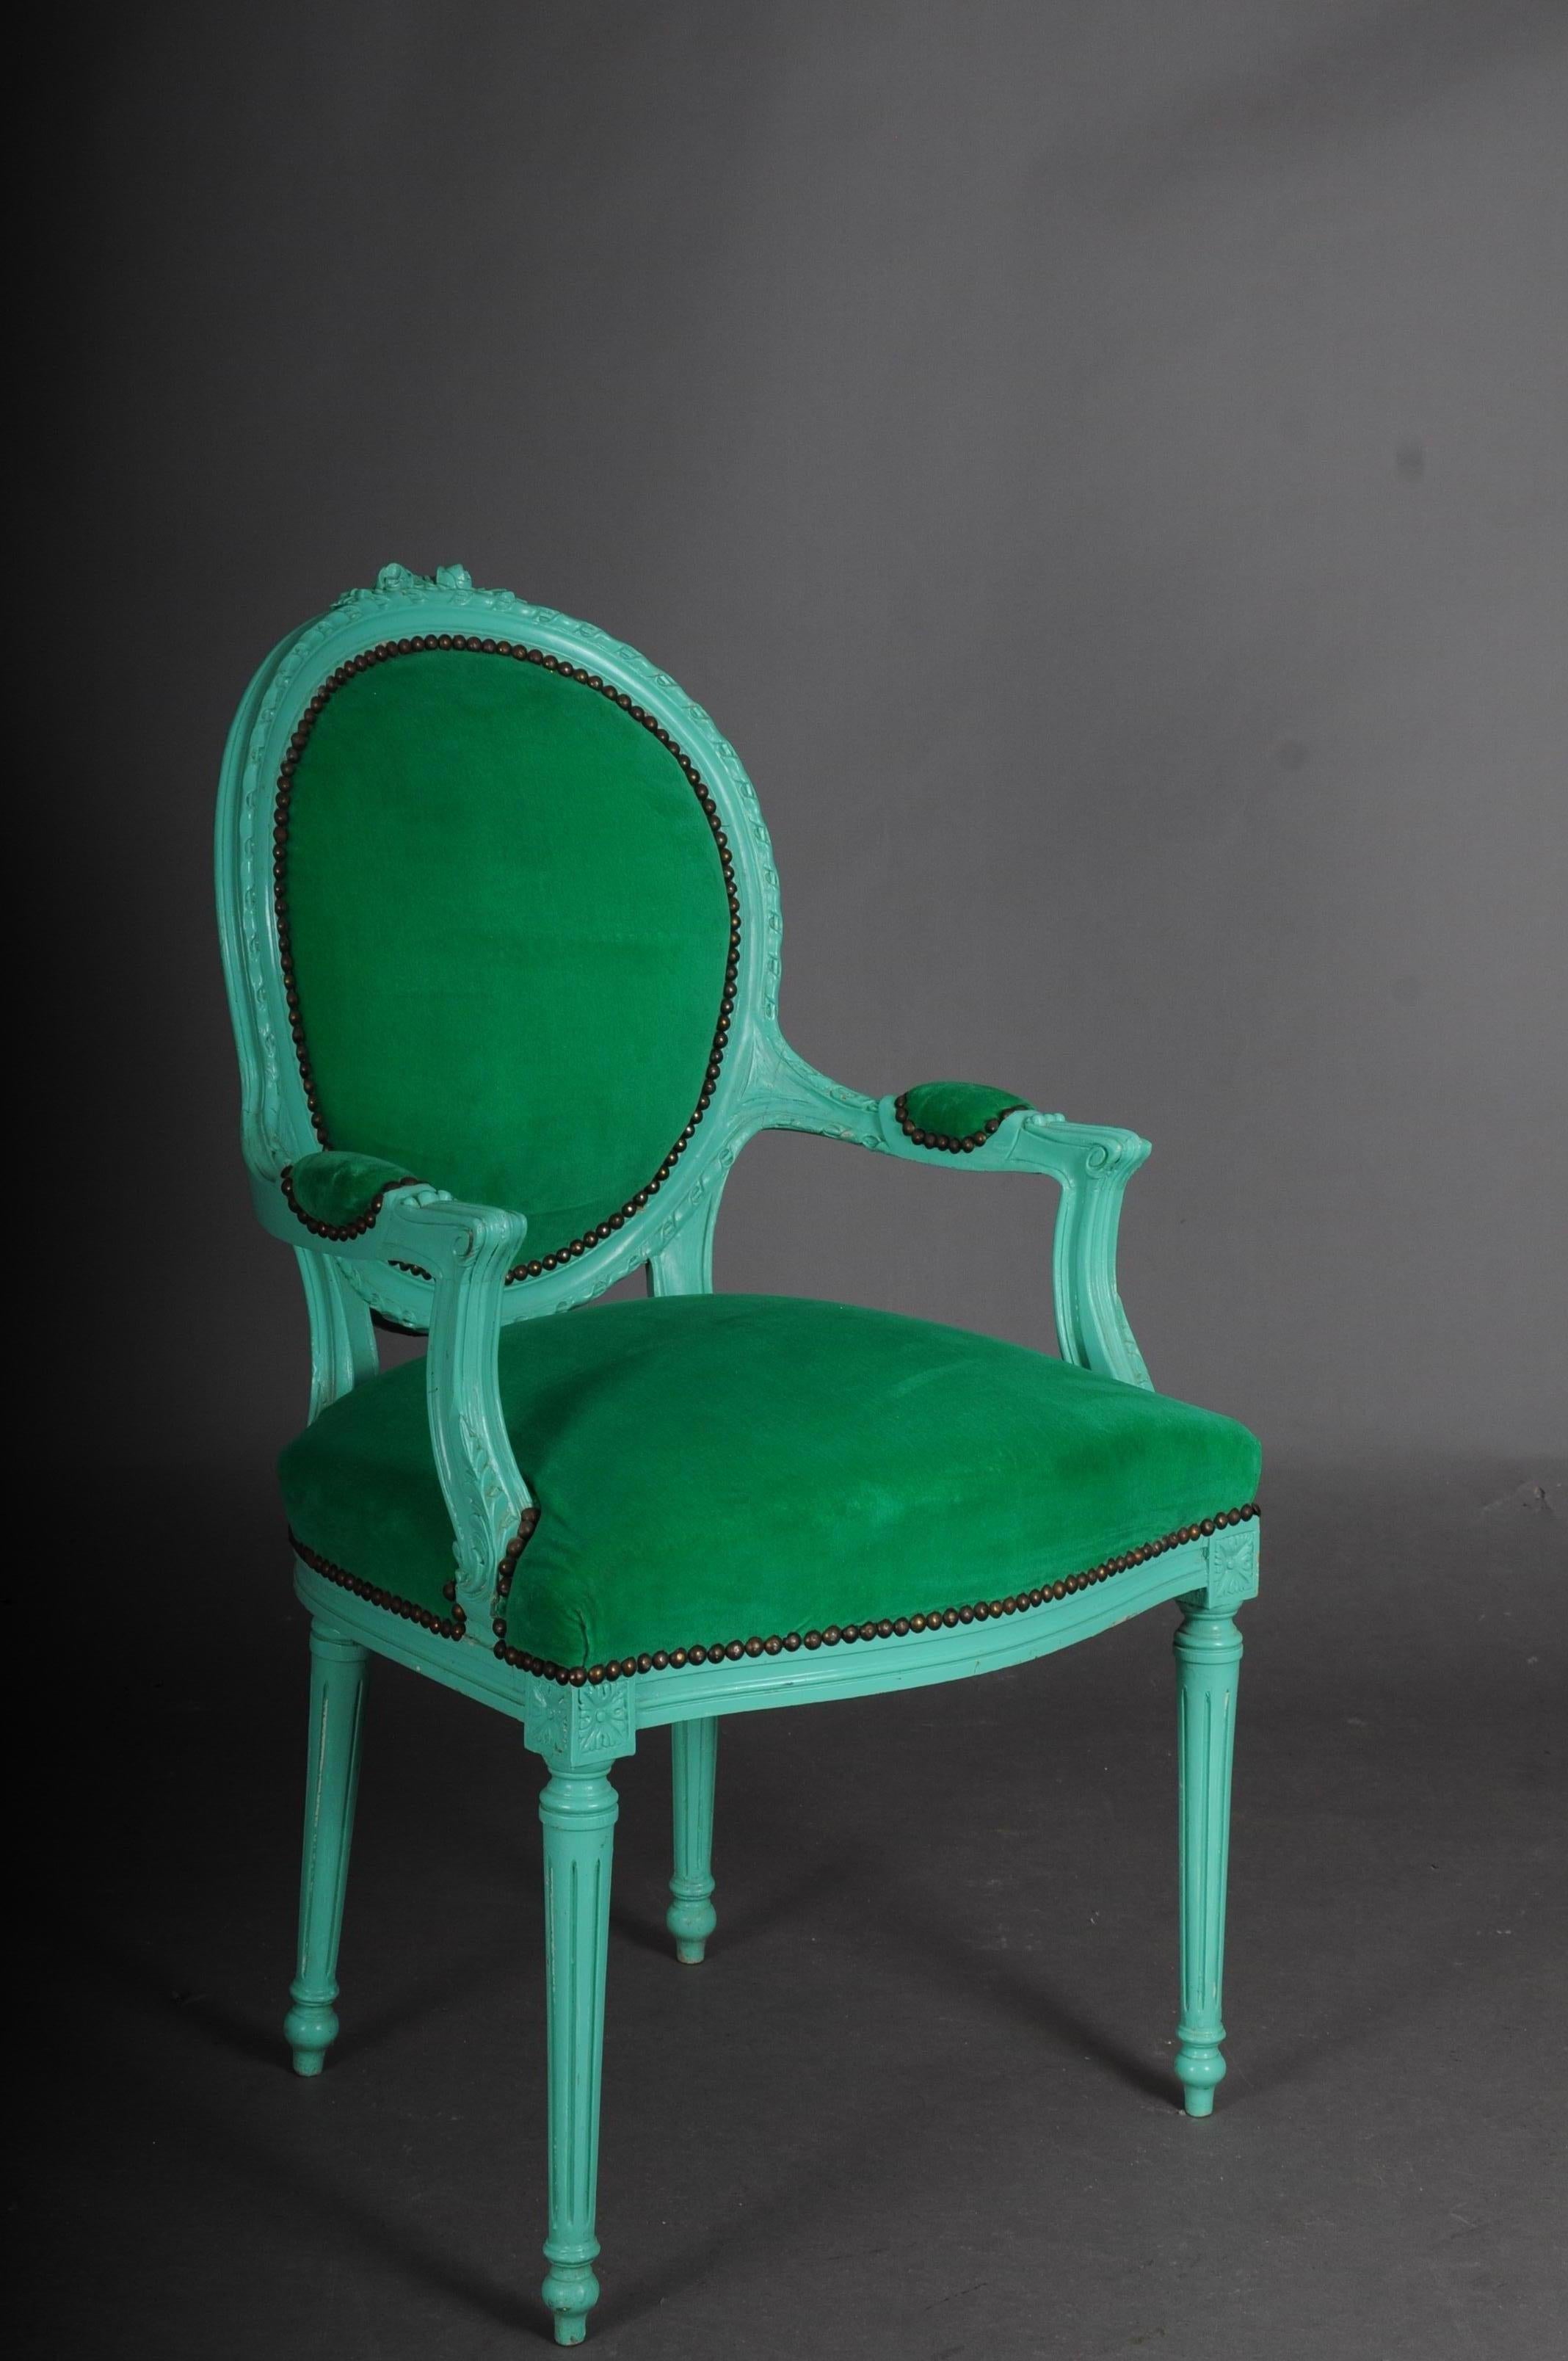 Painted Fancy Armchair/Chair in Louis XVI Style, Green